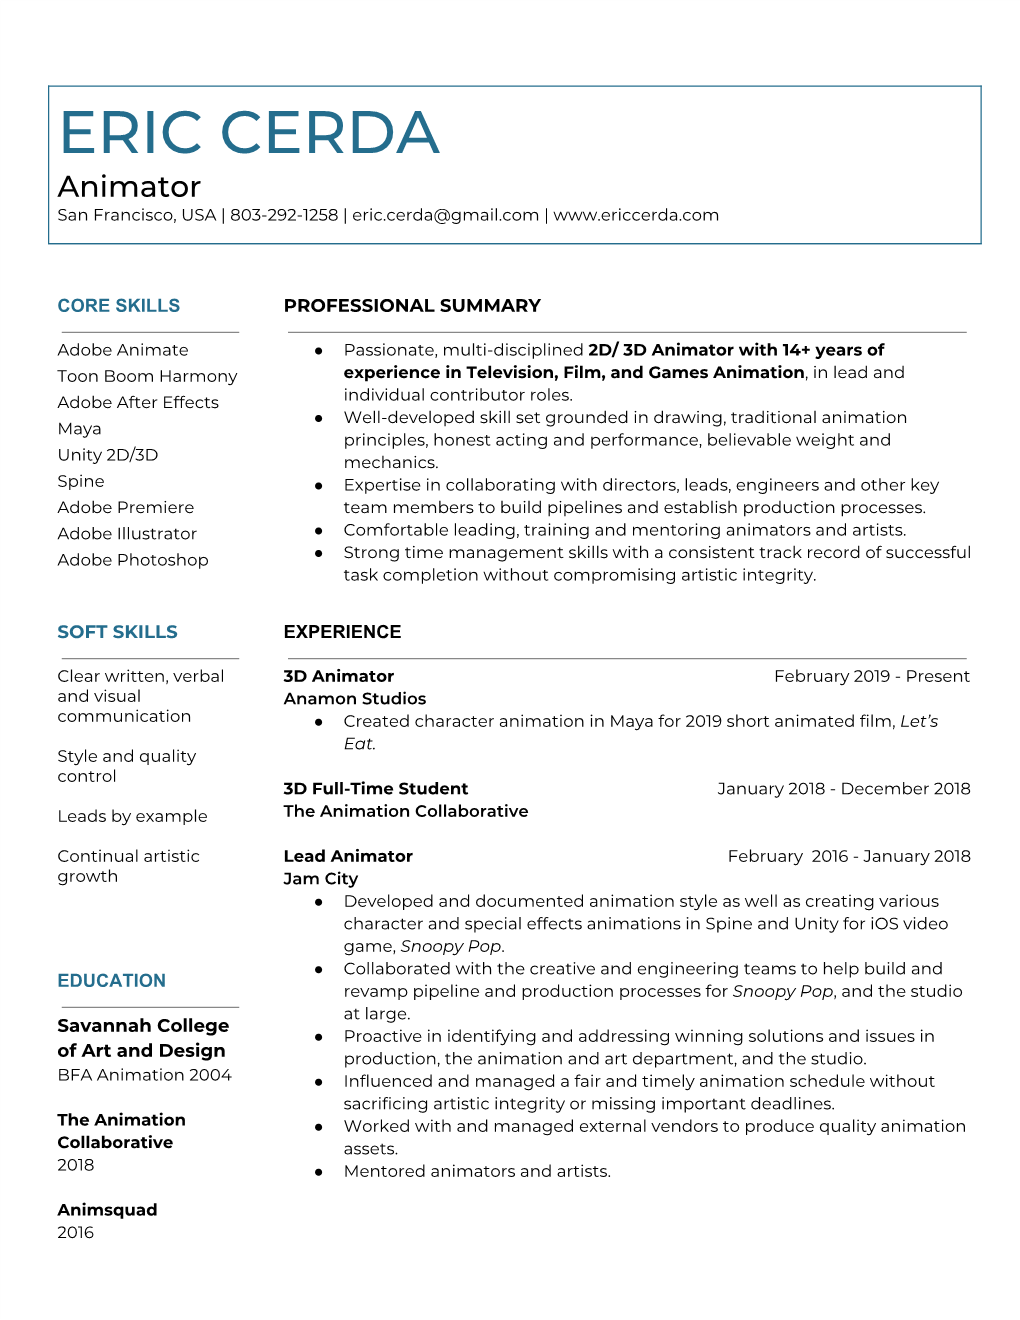 PDF Resume Available Here